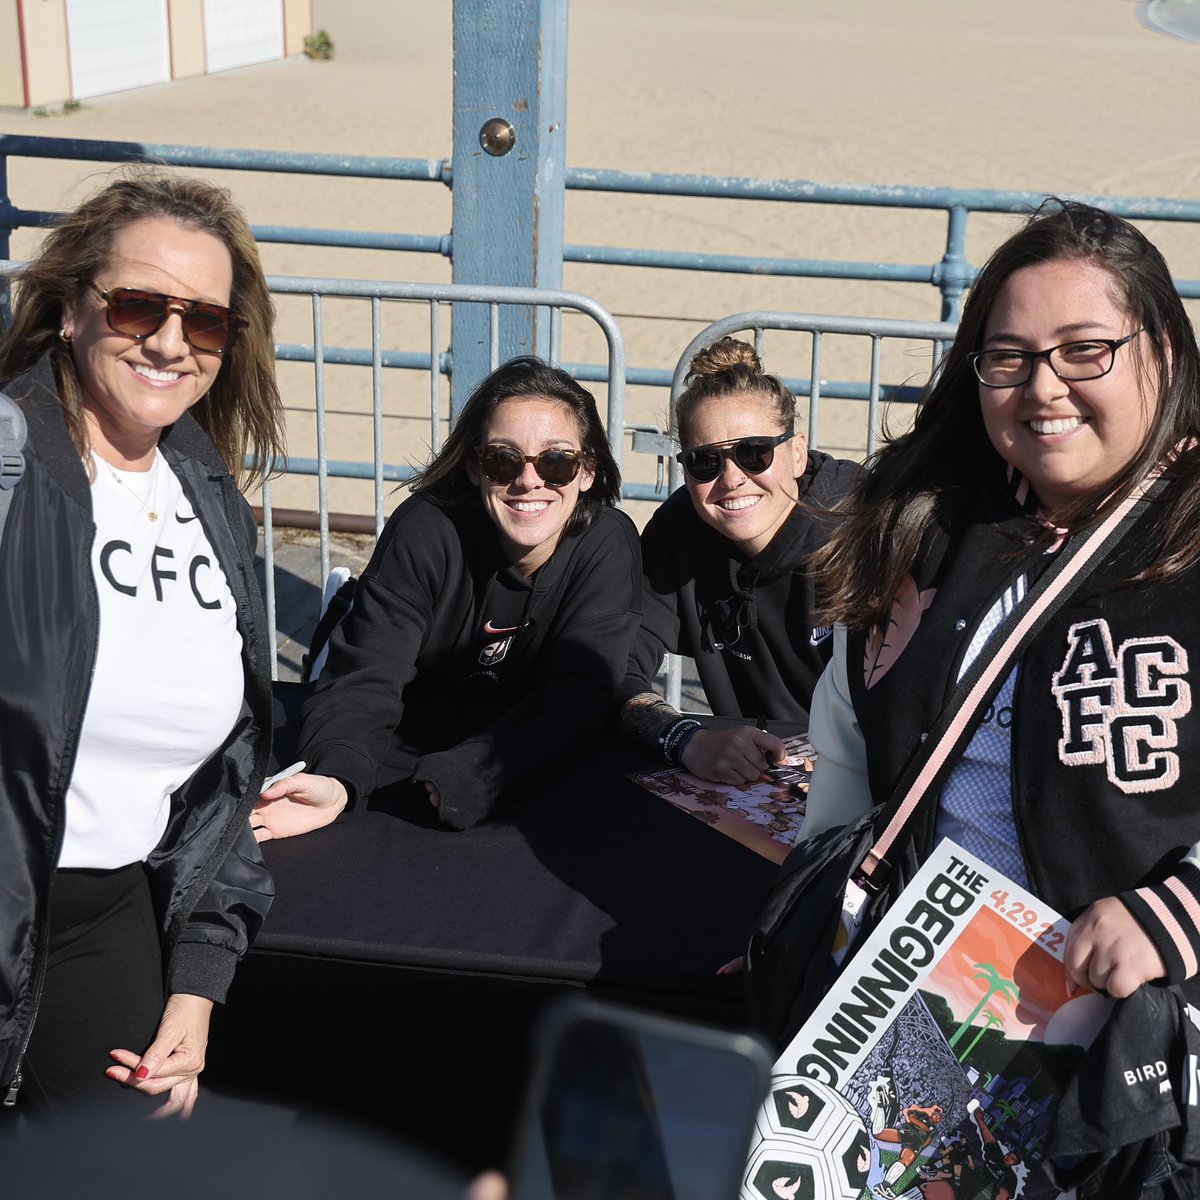 Huge thanks to all our Season Ticket Members who joined us for an incredible day at Santa Monica Pier! 🖤